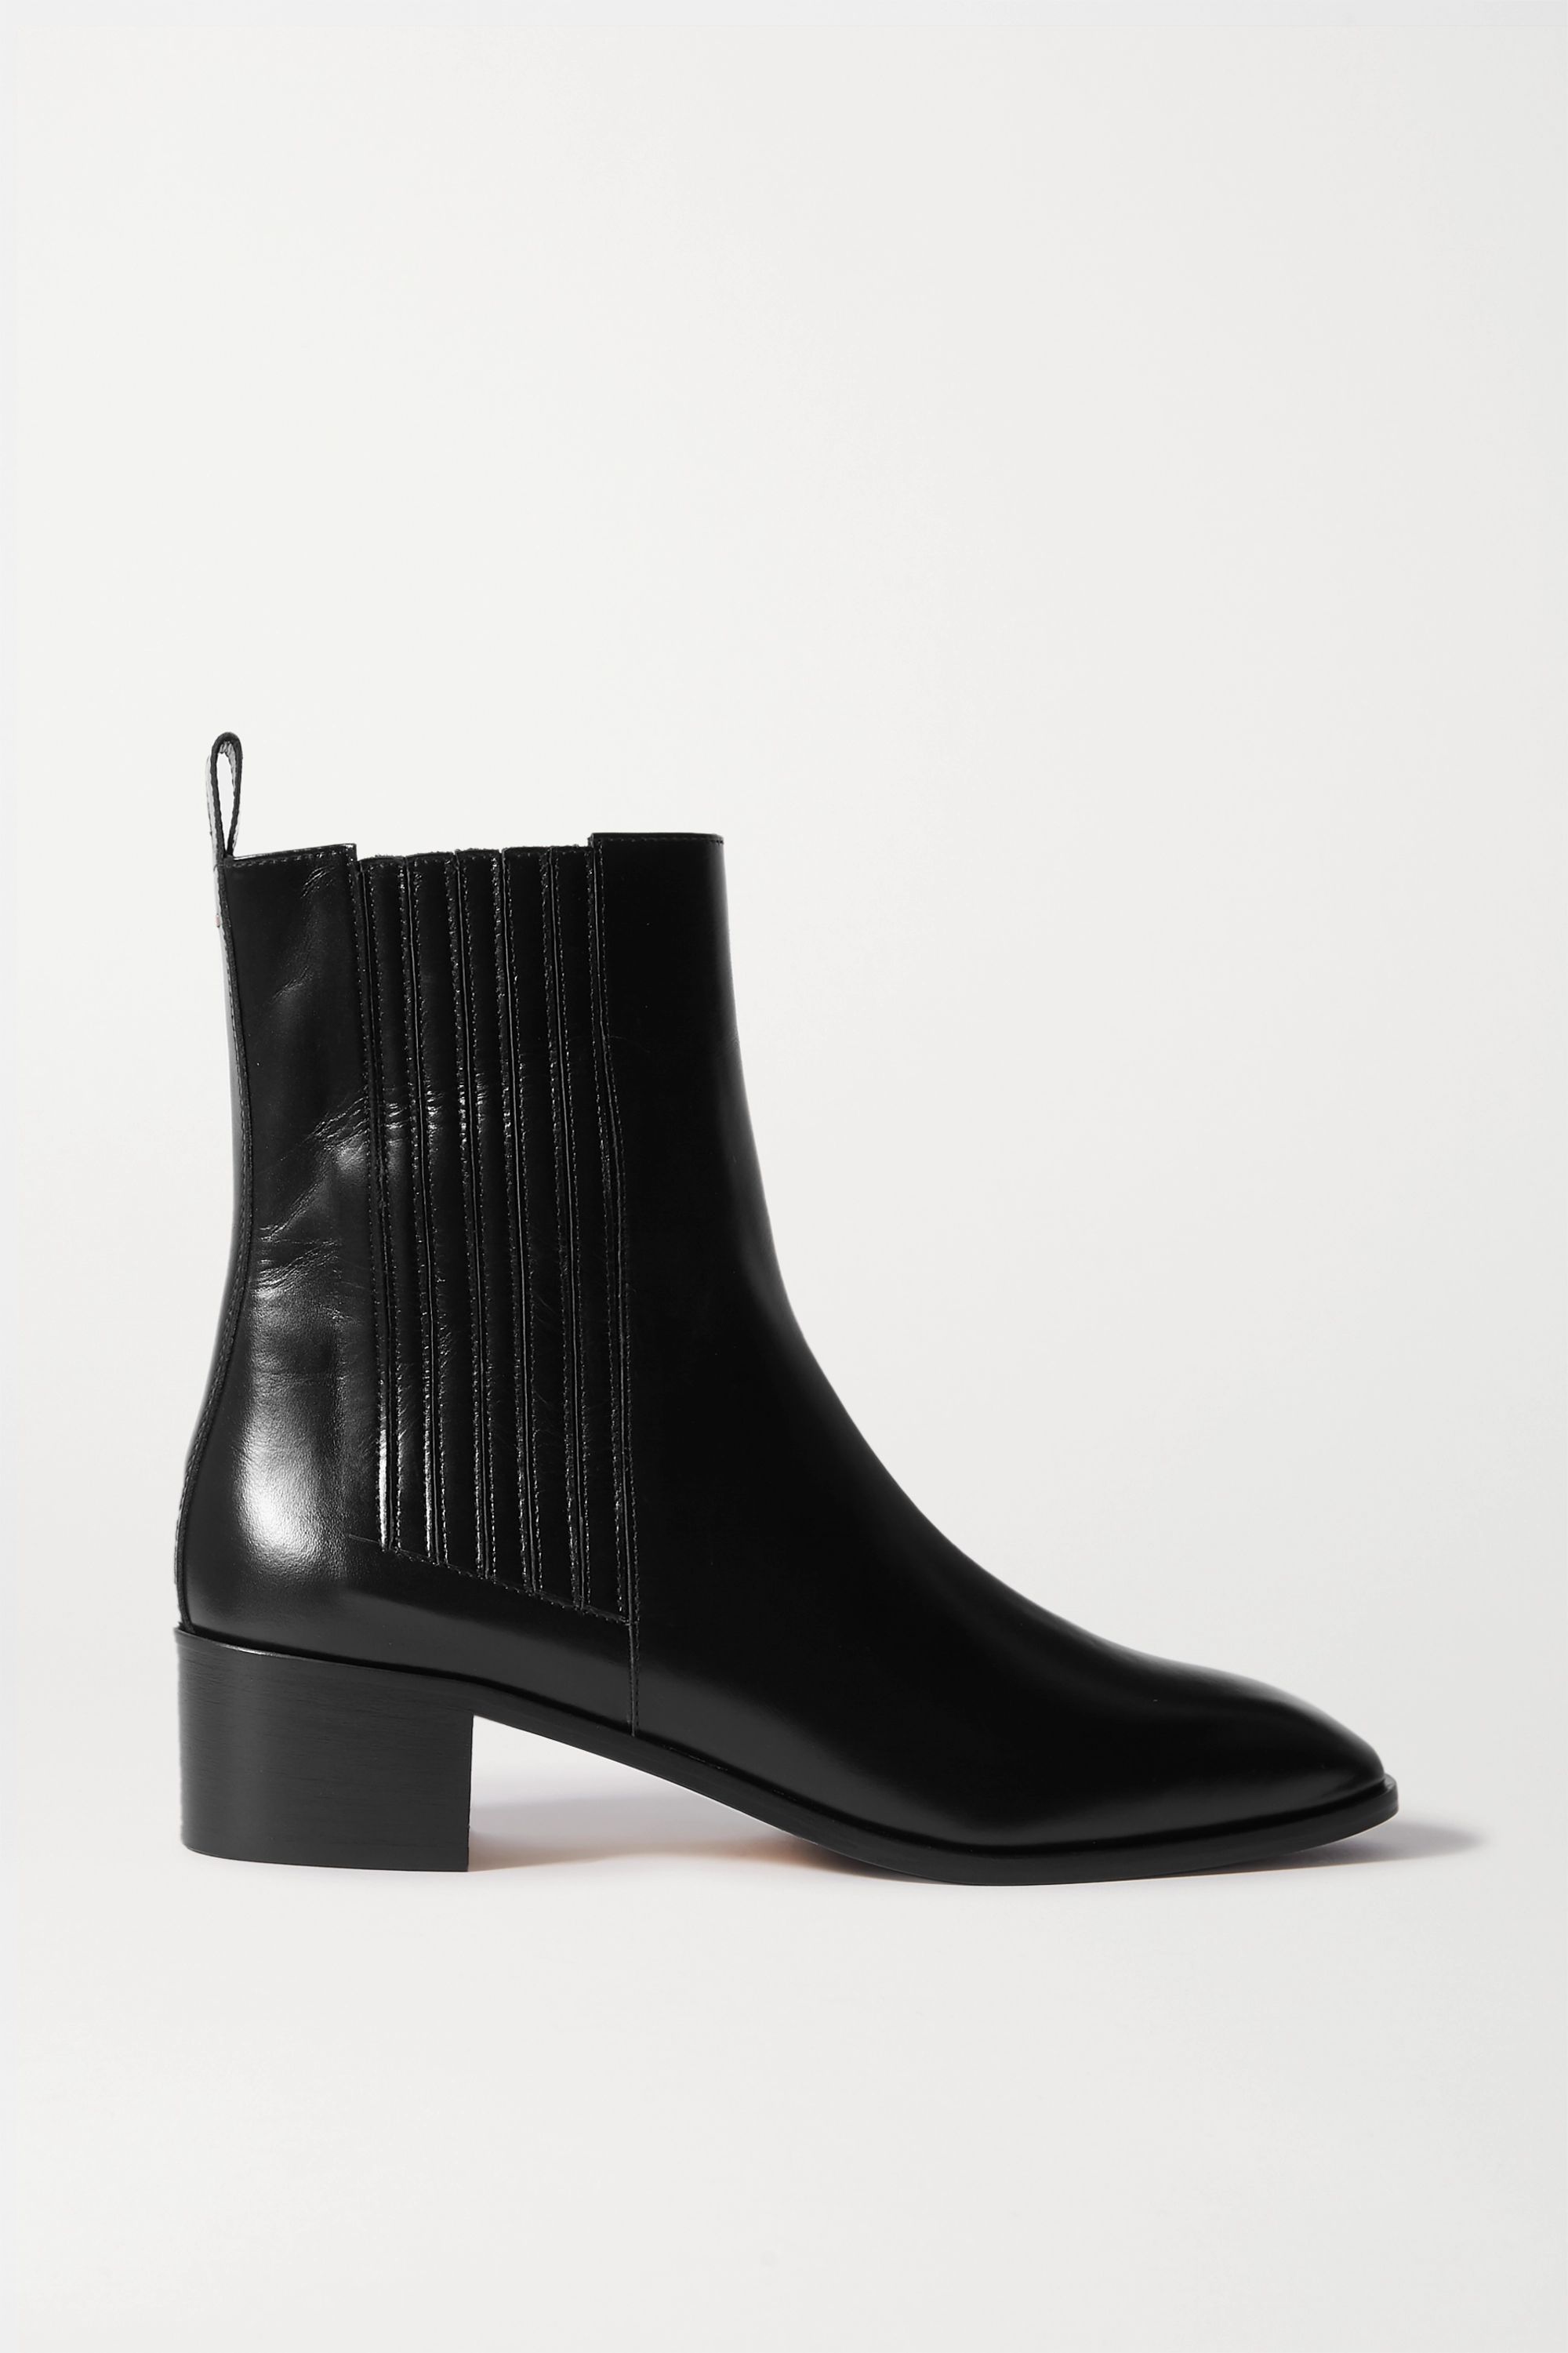 hip and bone chelsea boot